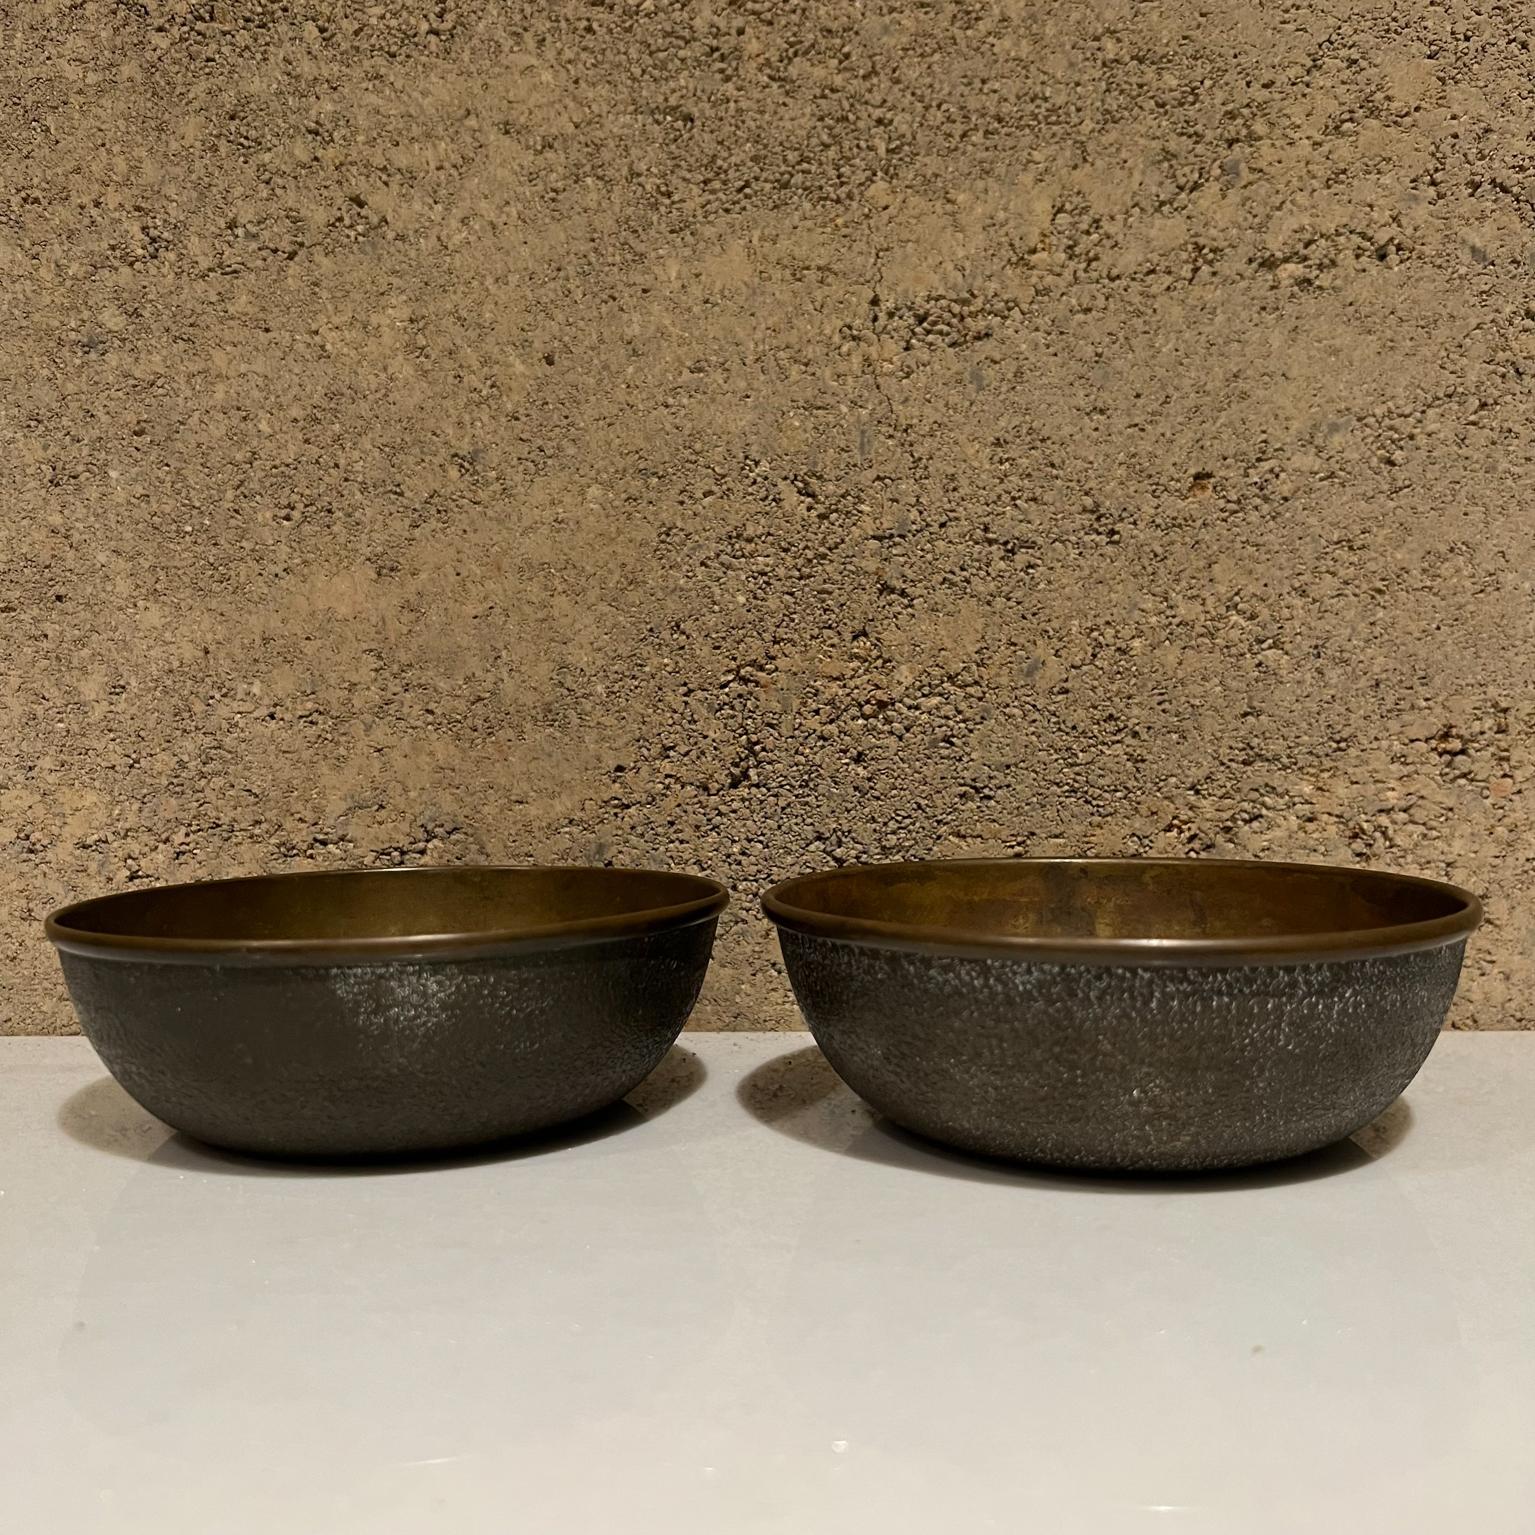 1920s Antique Art Deco Brass Bowls by Corfalgar London, England
Smooth interior textured exterior
Stamped by maker.
5.25 diameter x 1.75 tall
Preowned unrestored vintage condition. Wear present.
See images please.